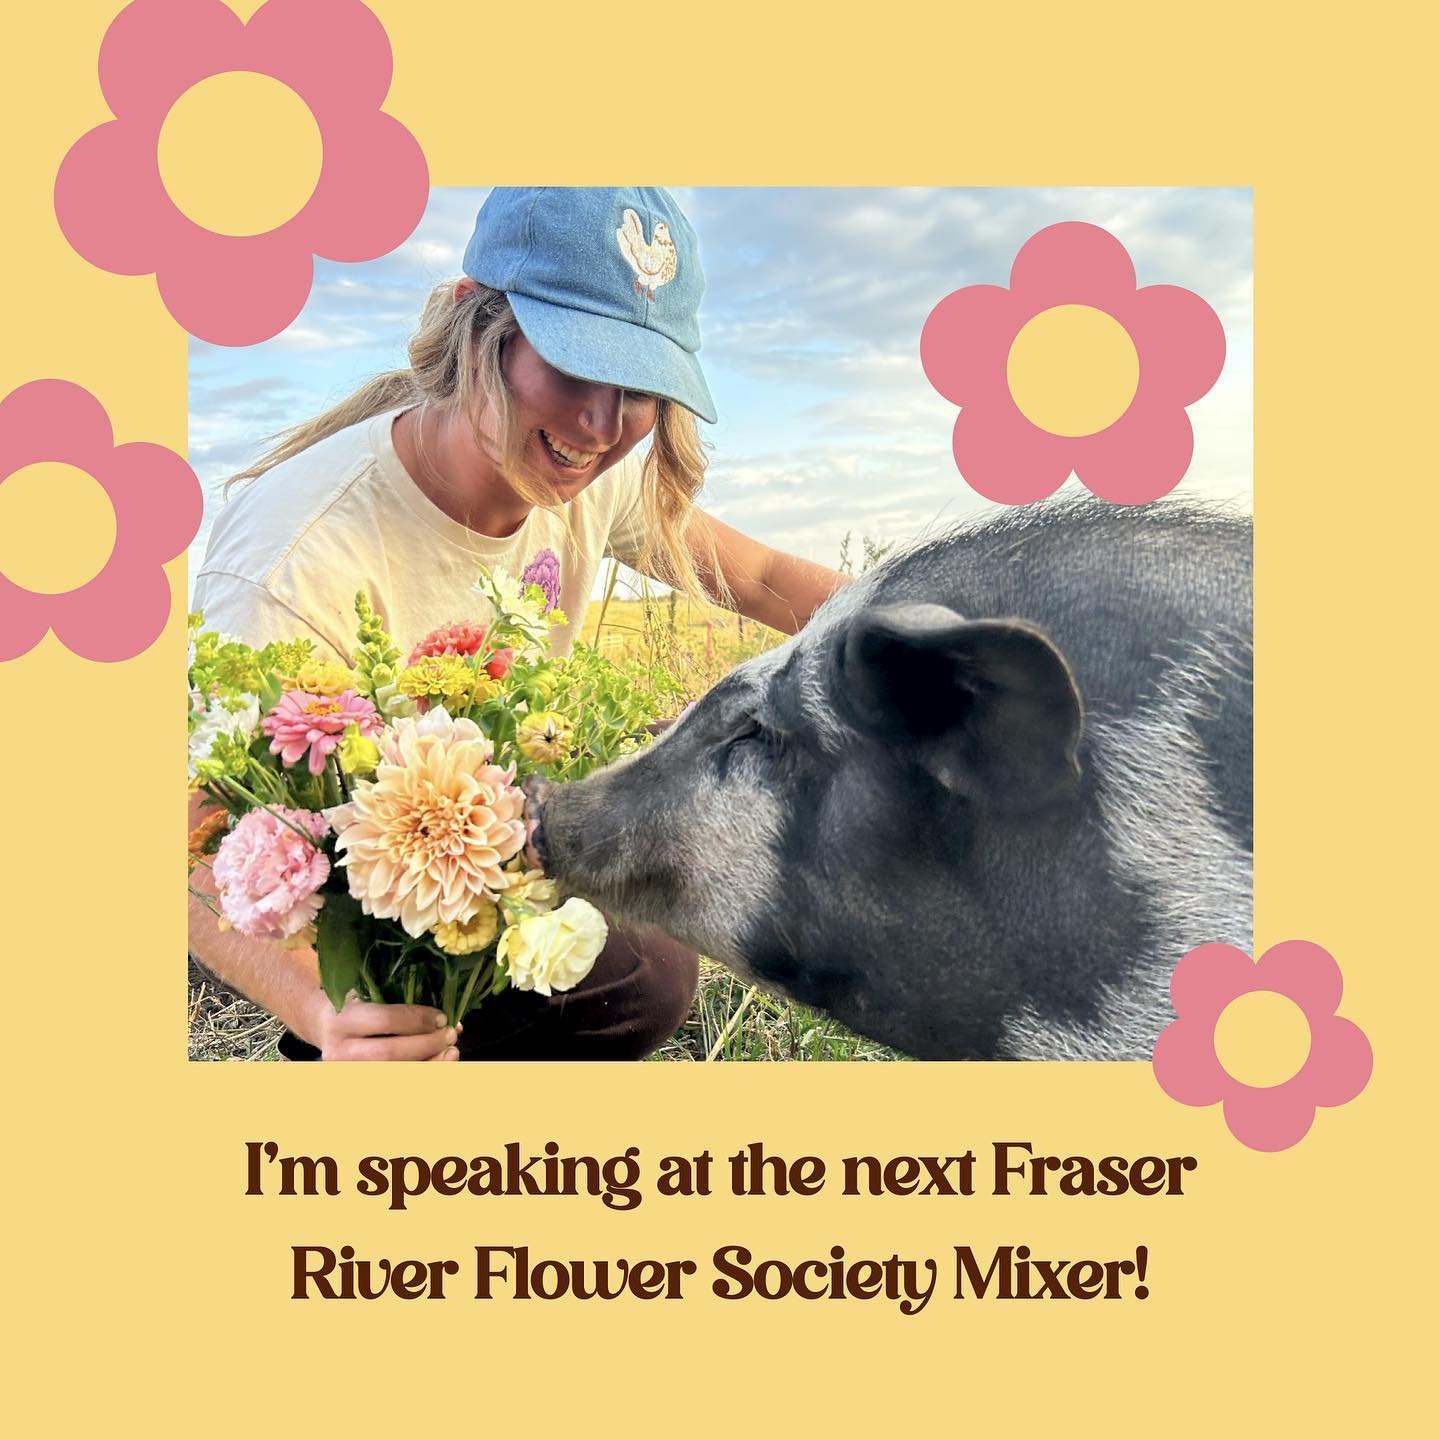 Just over one week out from &ldquo;Bloom With Brand Strategy&rdquo; with @fraserriverflowersociety! 

Here&rsquo;s what to expect:

🔍 Deep Dive into Brand Strategy: Uncover the essentials and learn why it&rsquo;s the heartbeat of your business.

🔄 